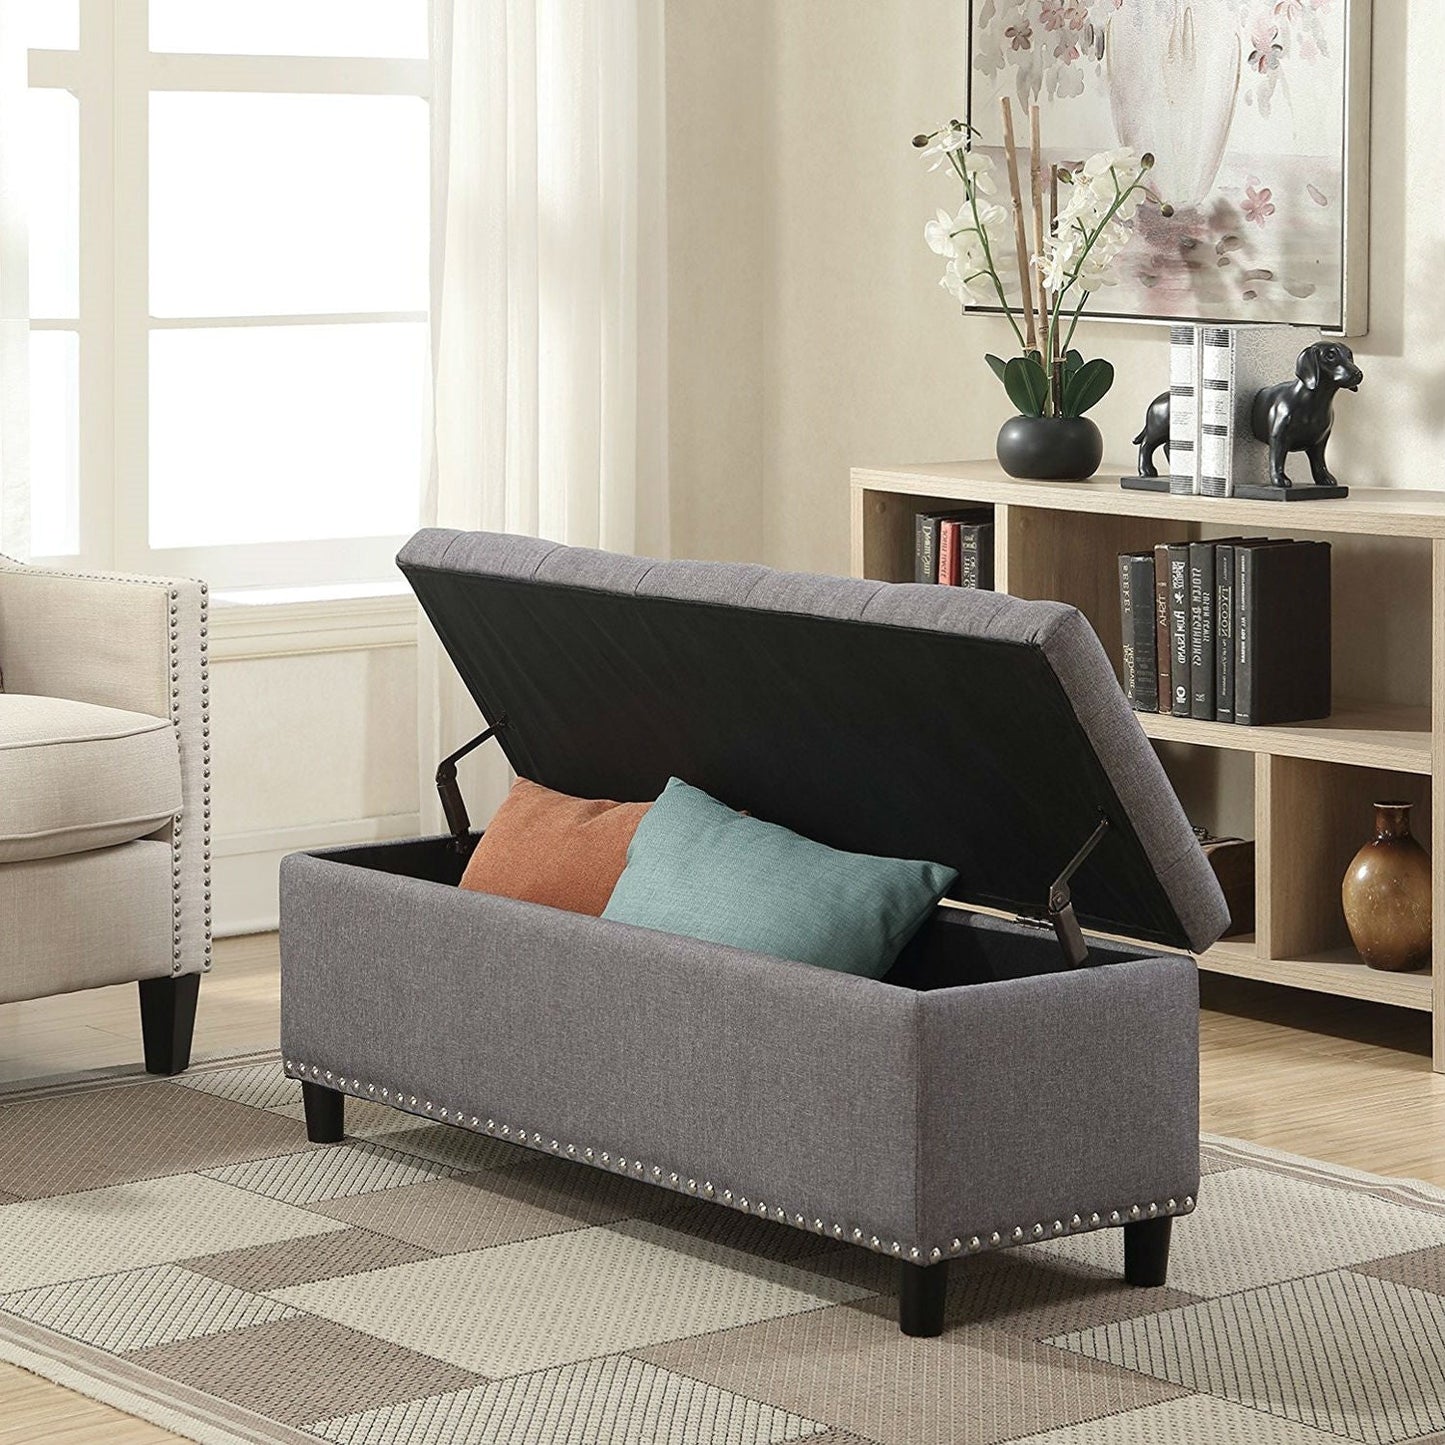 Accents > Benches - Grey Linen 48-inch Bedroom Storage Ottoman Bench Footrest